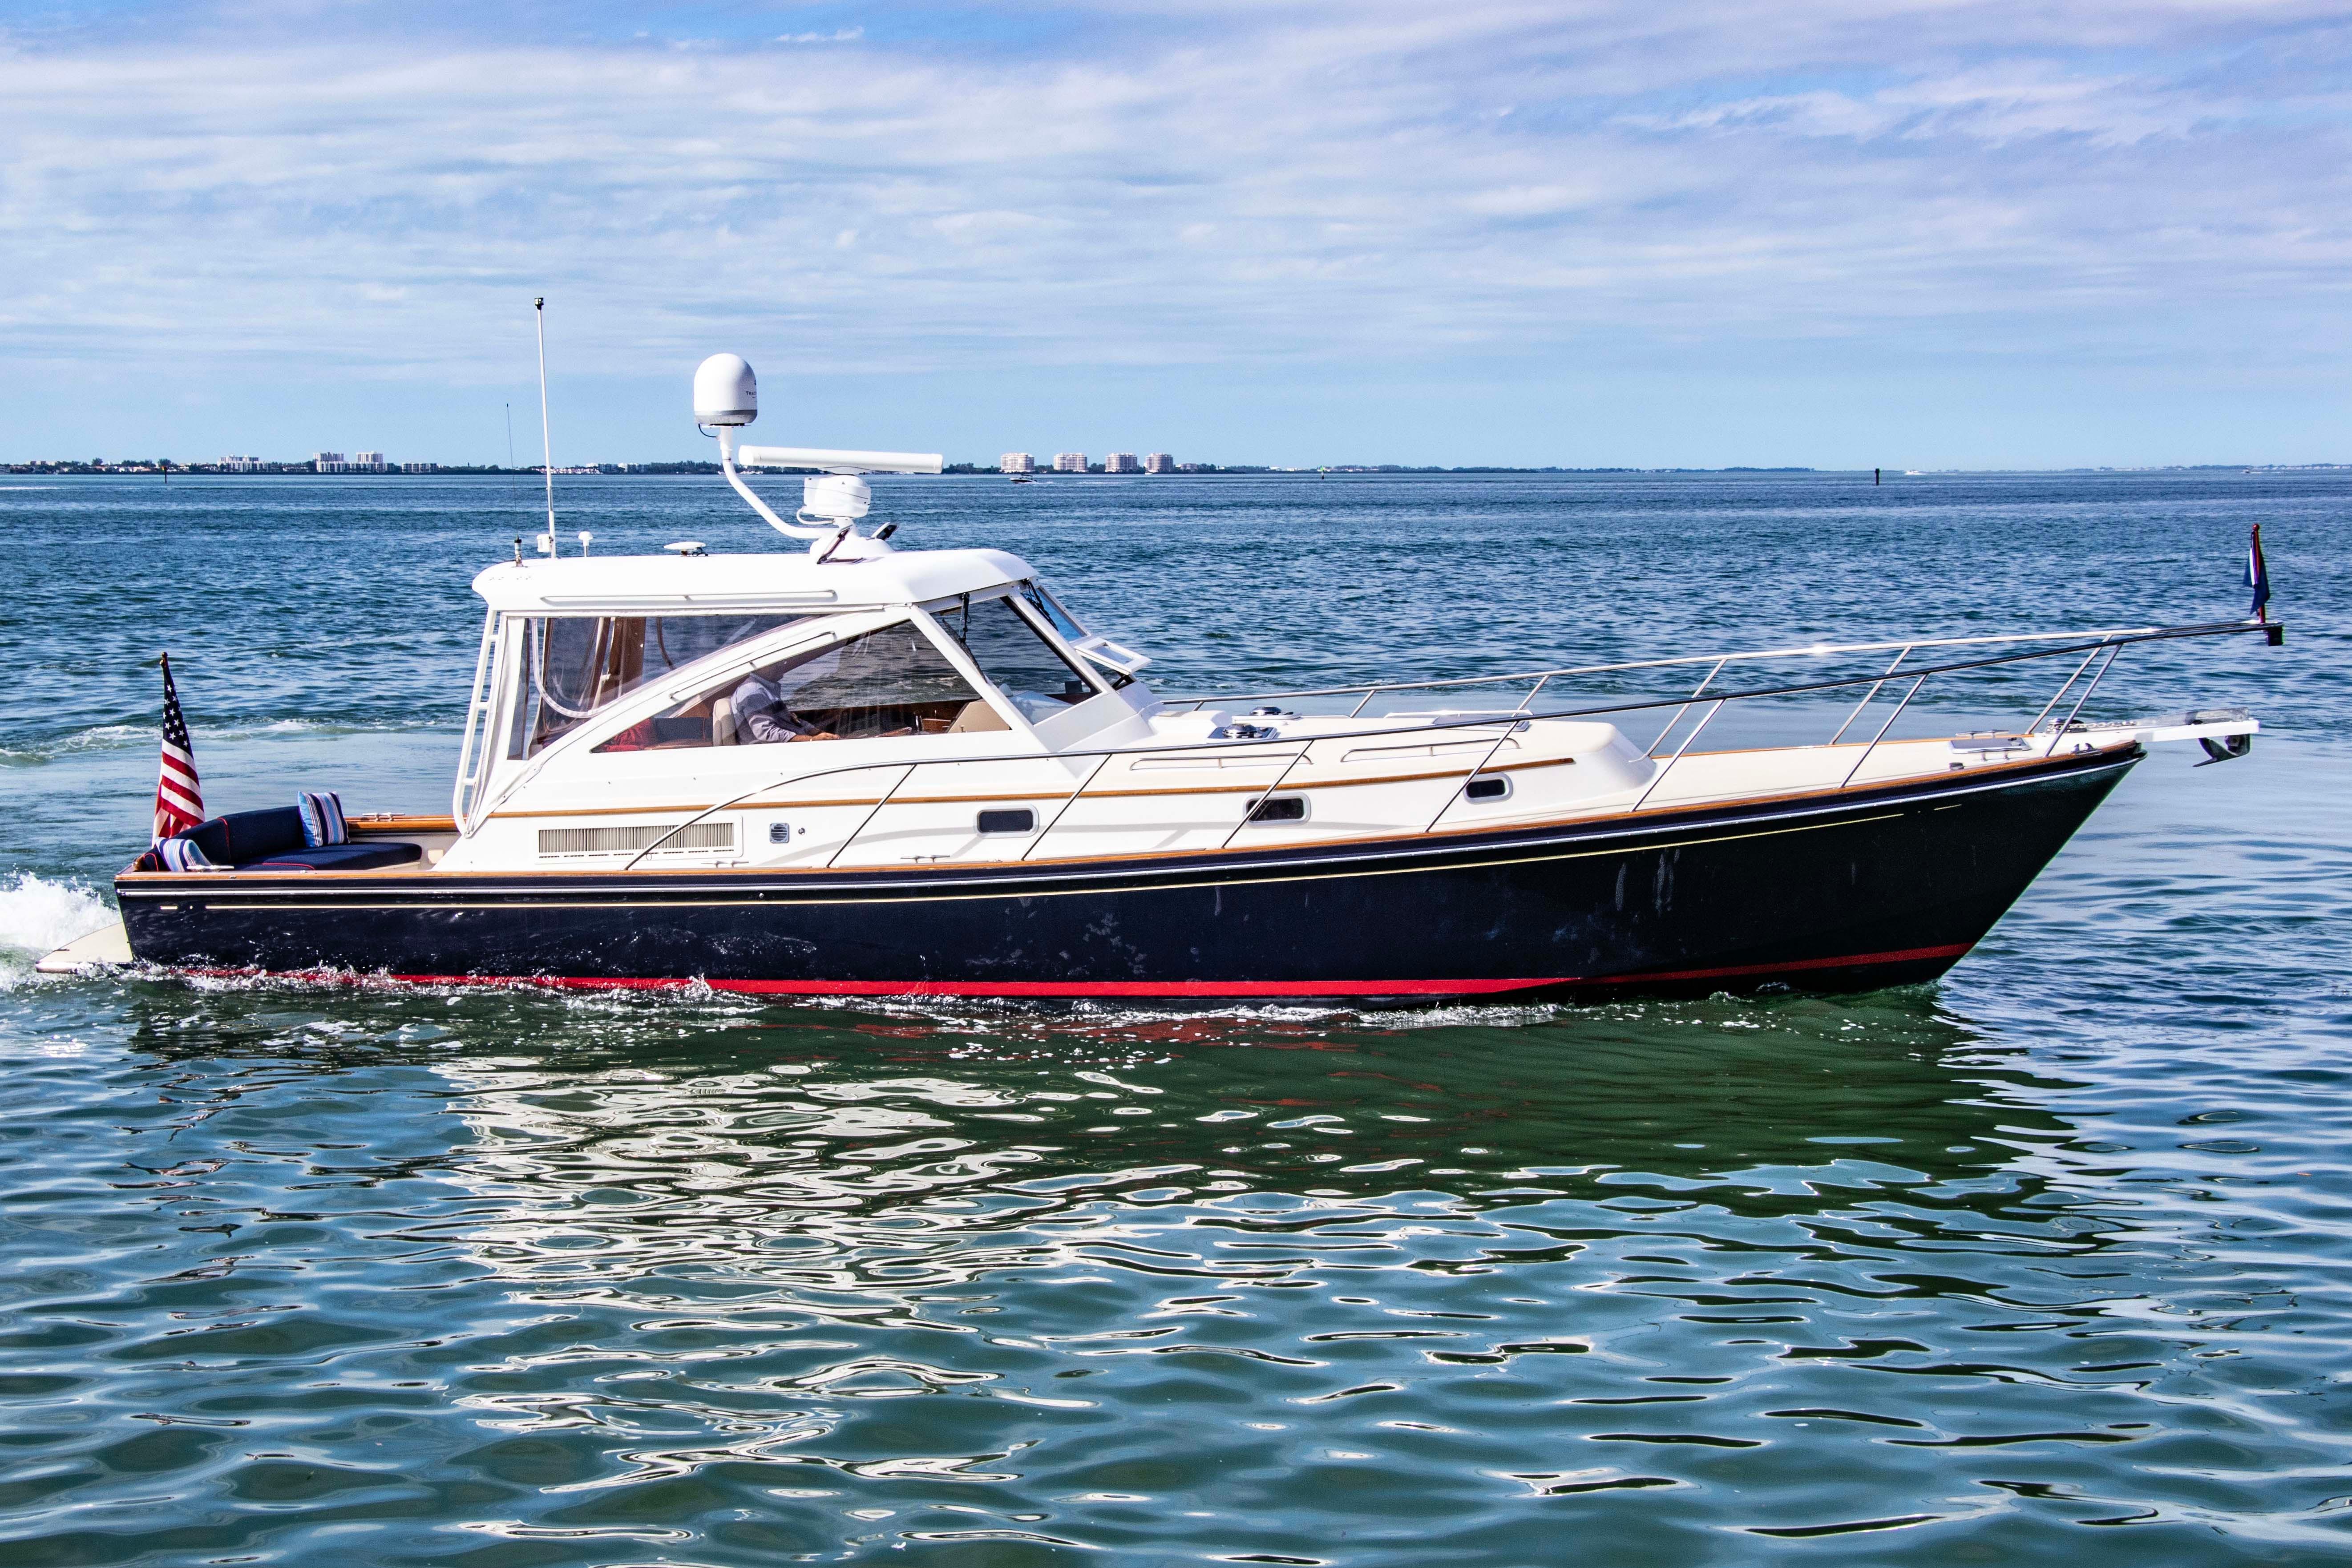 This 2003 40' Hinckley Little Harbor WhisperJet for sale - SYS Yacht Sales